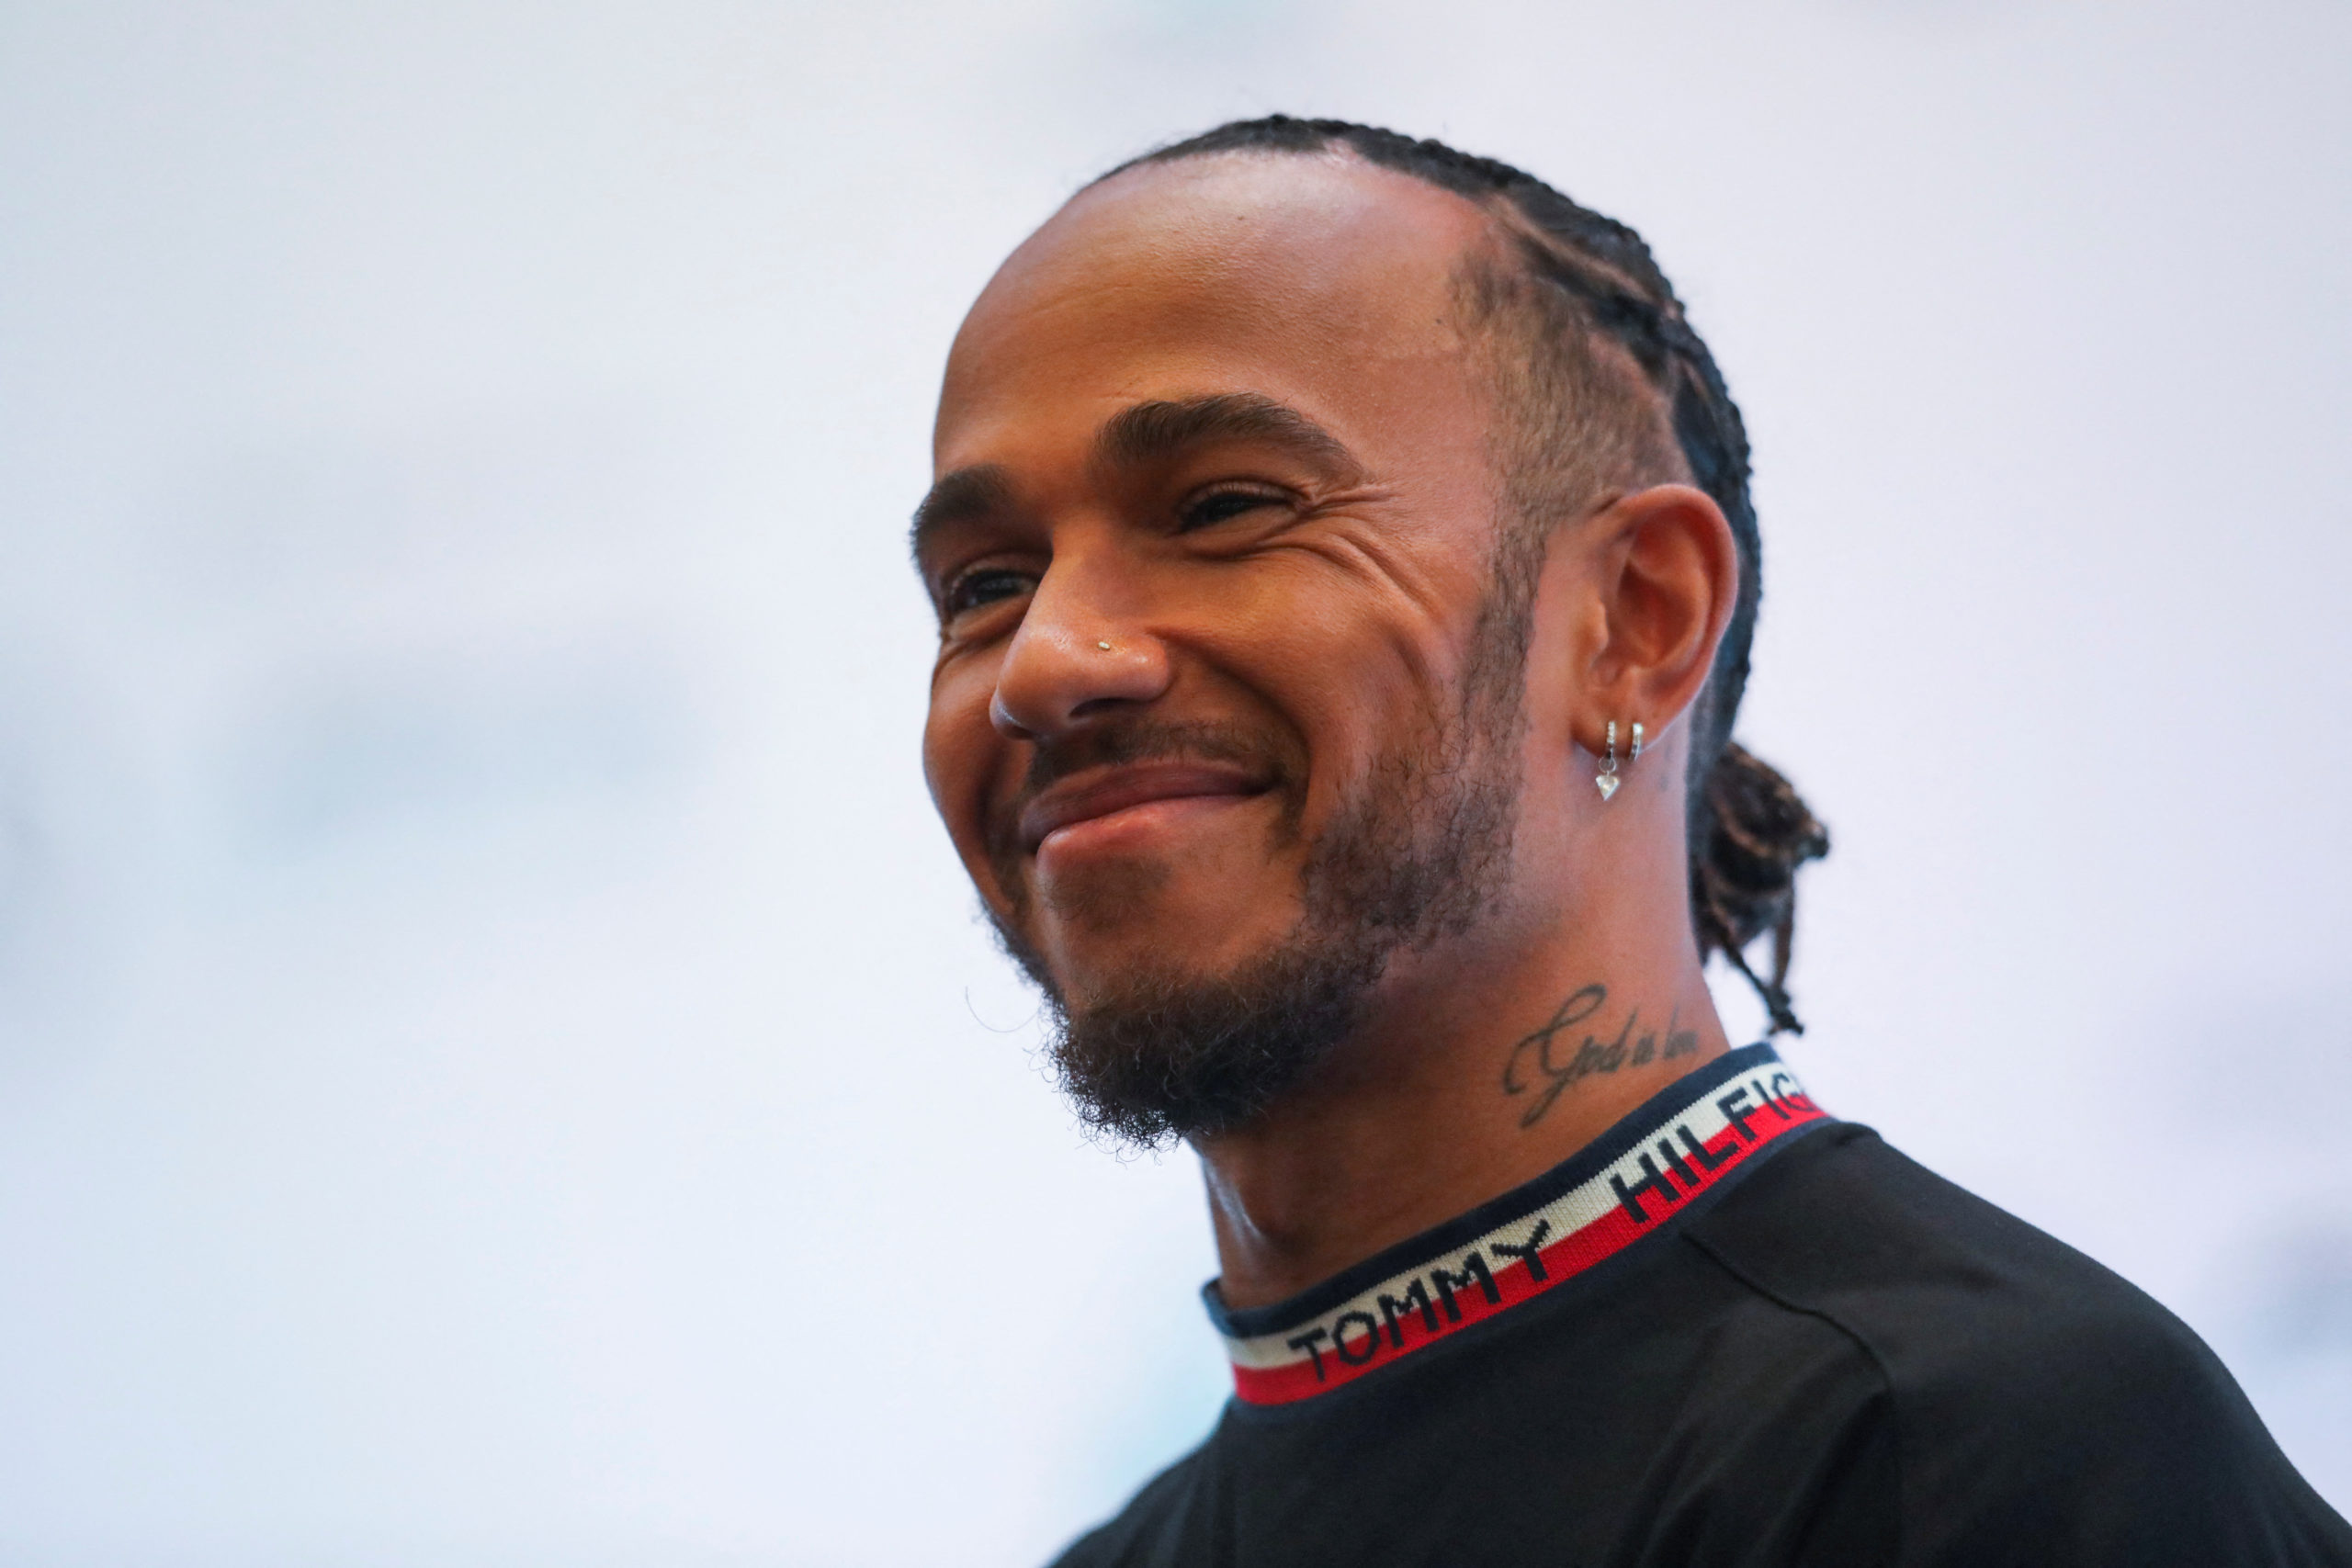 Mercedes-AMG Petronas Formula One Team driver Lewis Hamilton gestures during a news conference in Kuala Lumpur, Malaysia, ahead of the Singapore Grand Prix, September 28, 2022. 